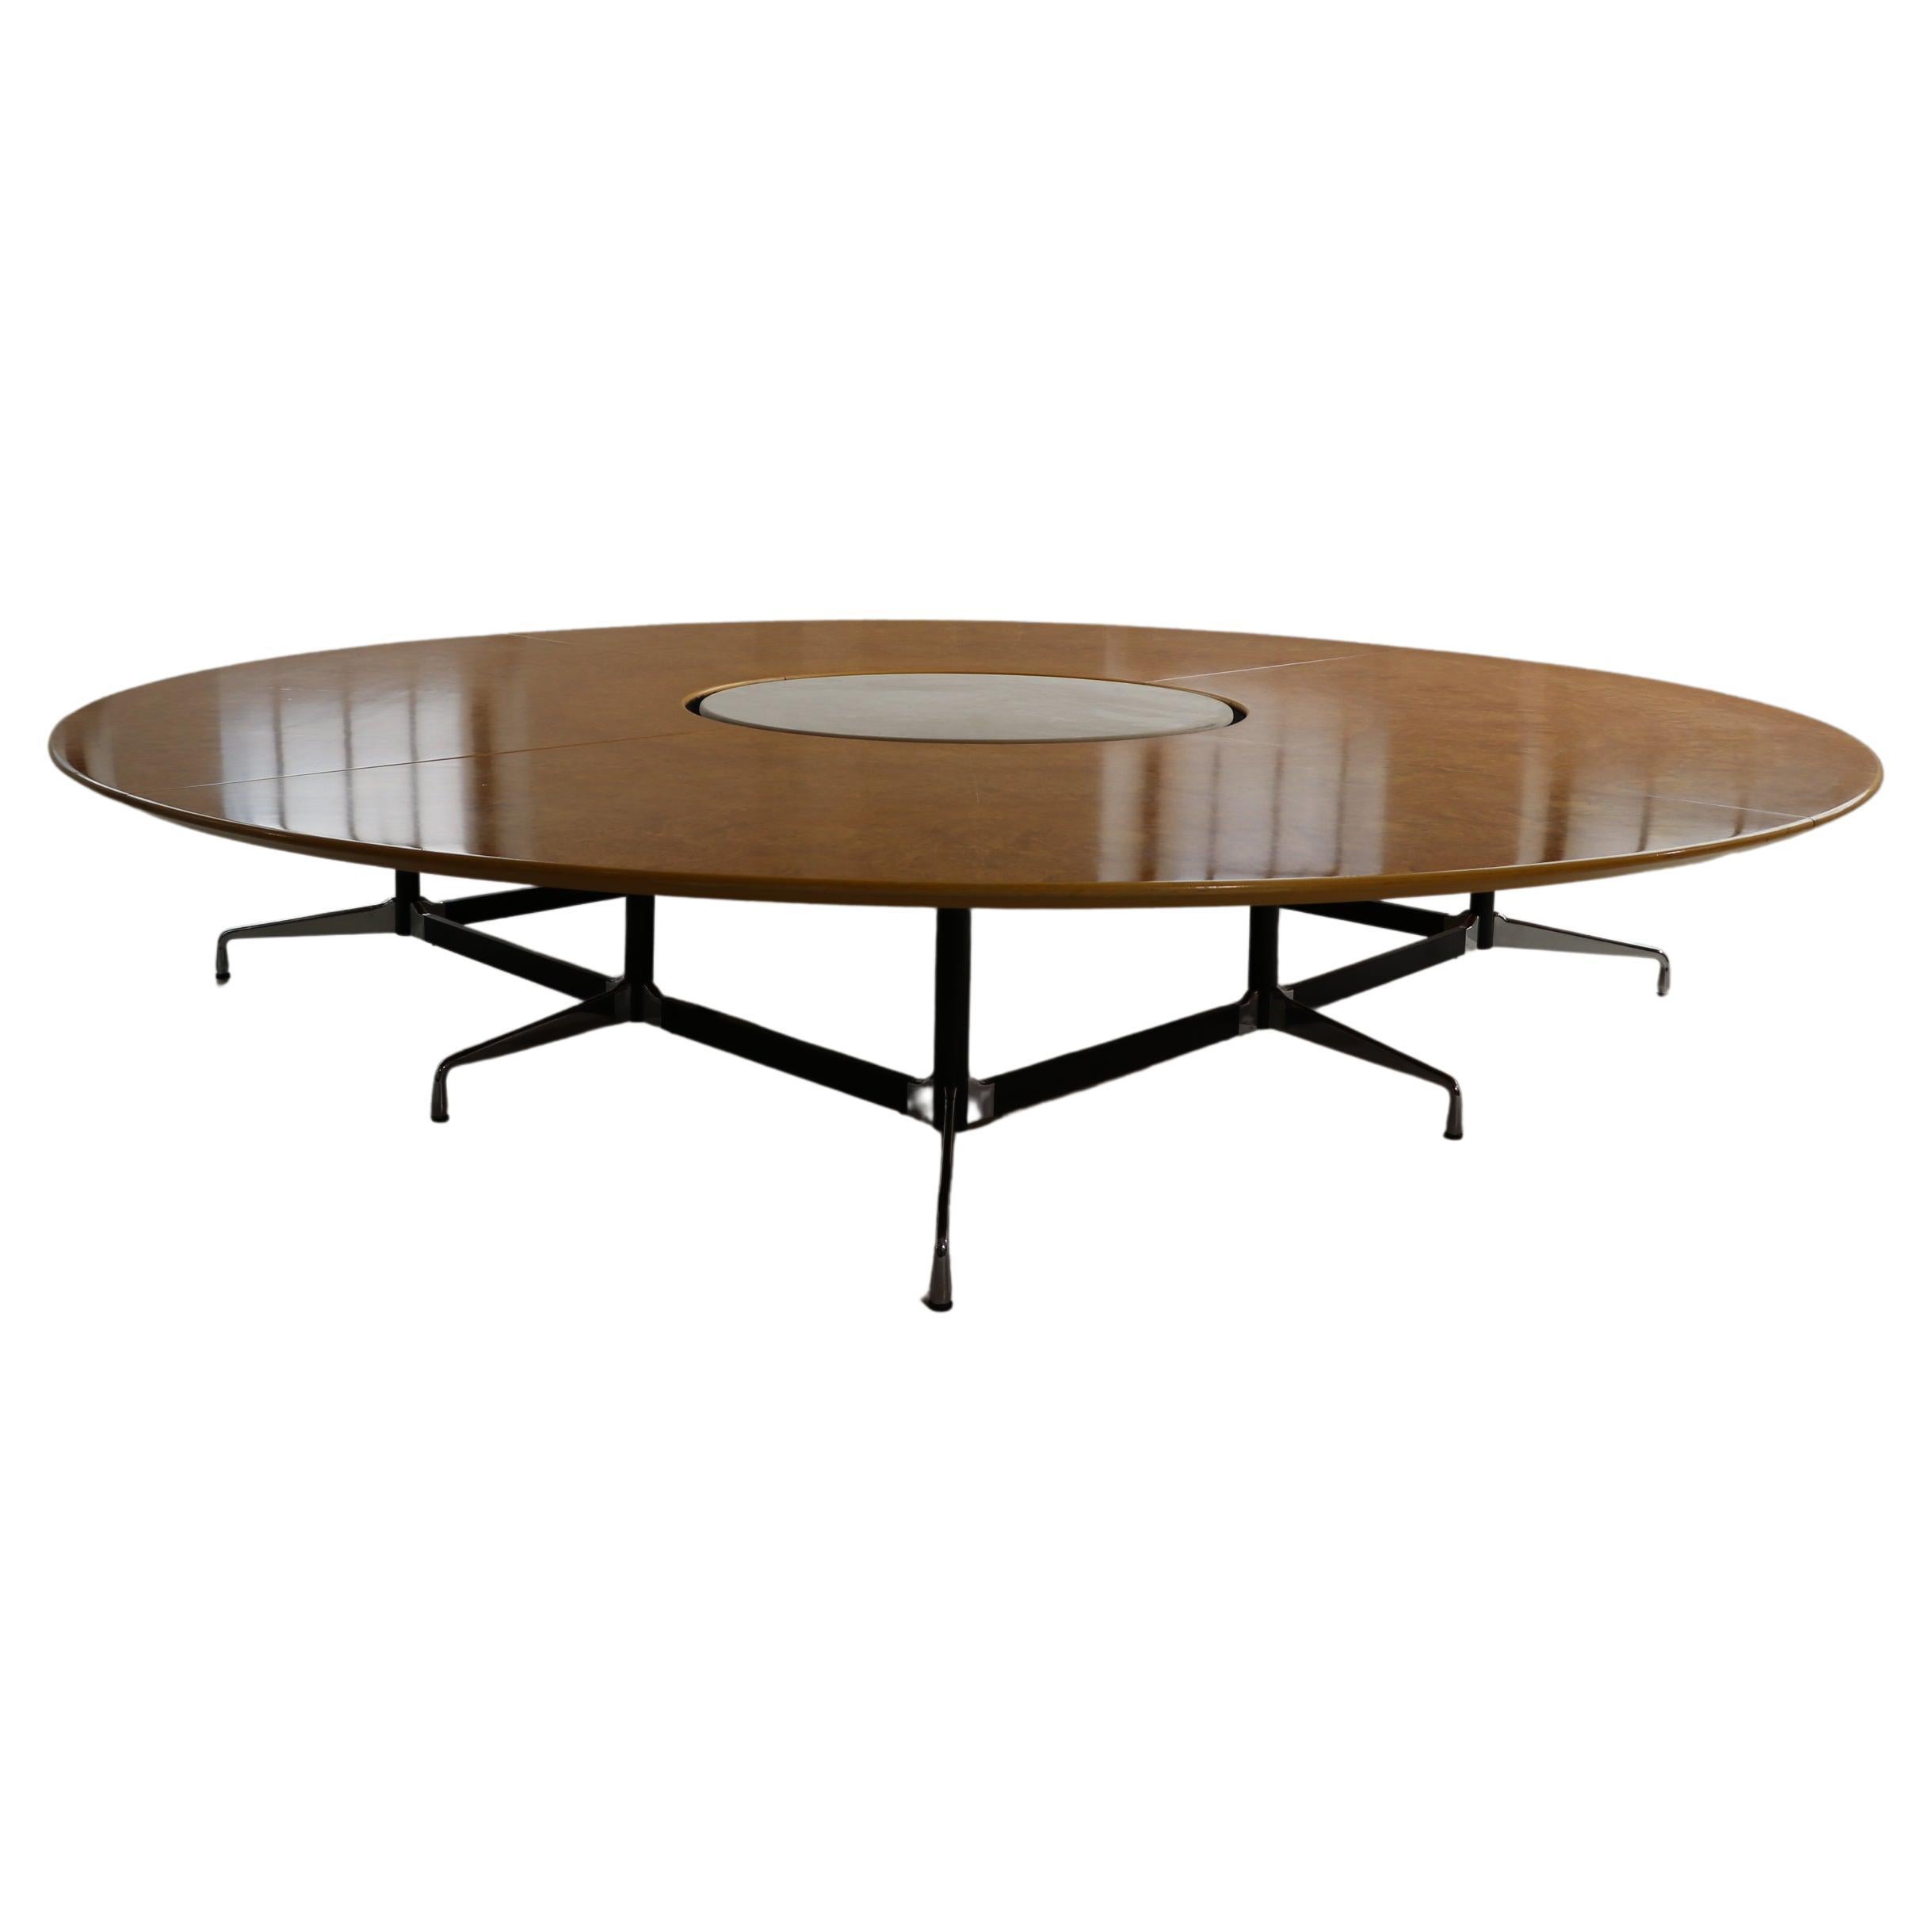 Vitra/Herman Miller Conference table Charles Eames Segmented Table round 400 cm For Sale